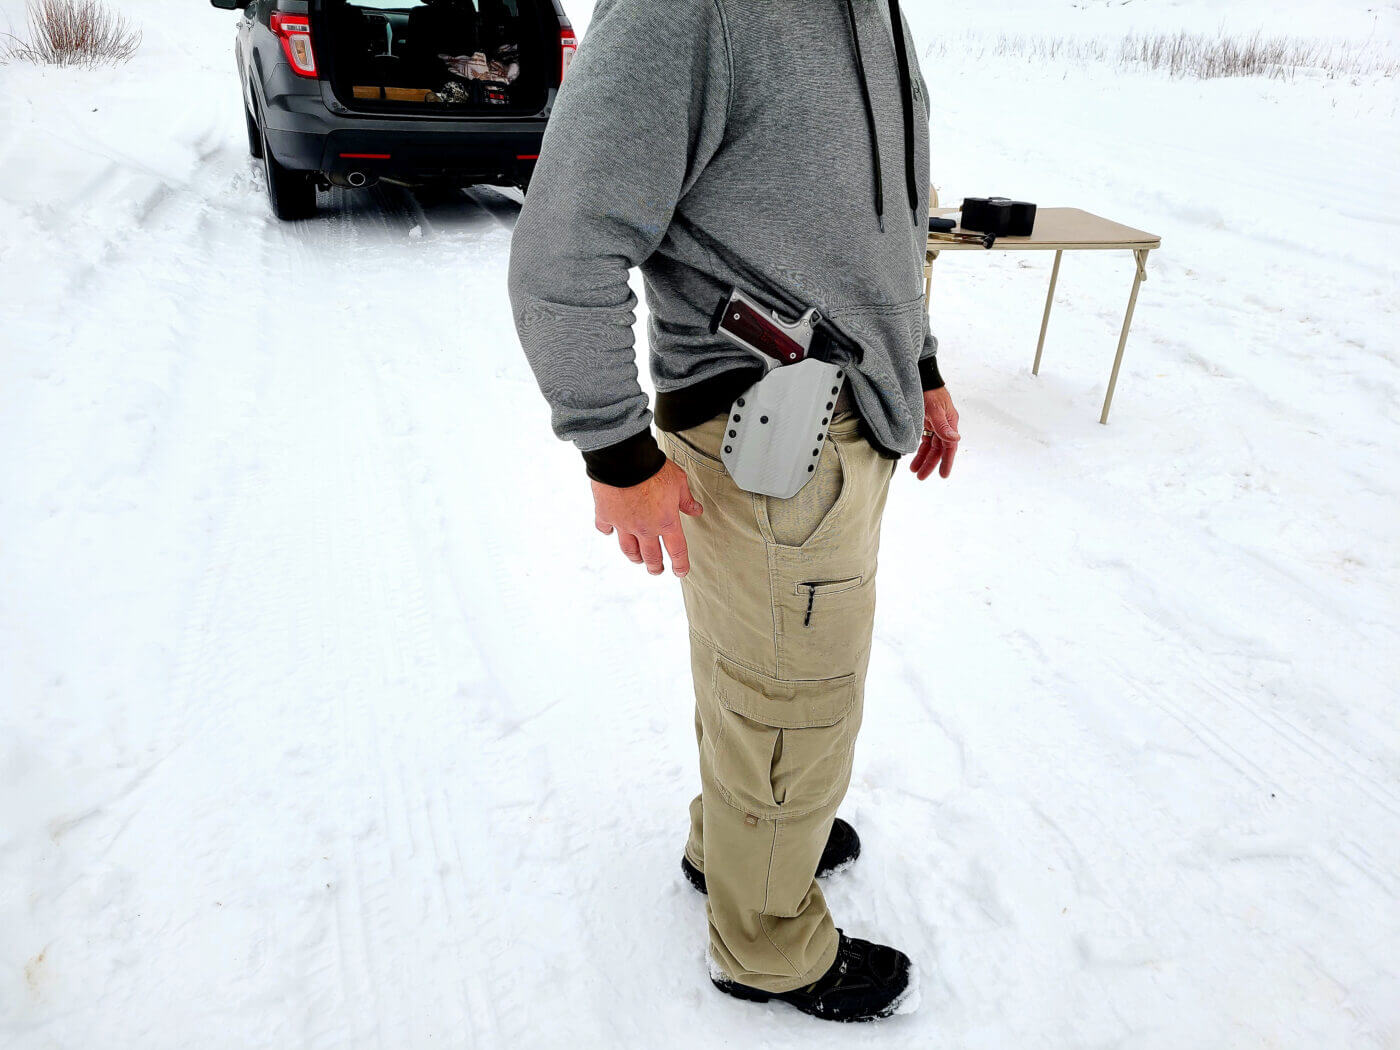 Carrying a full size 1911 pistol in winter